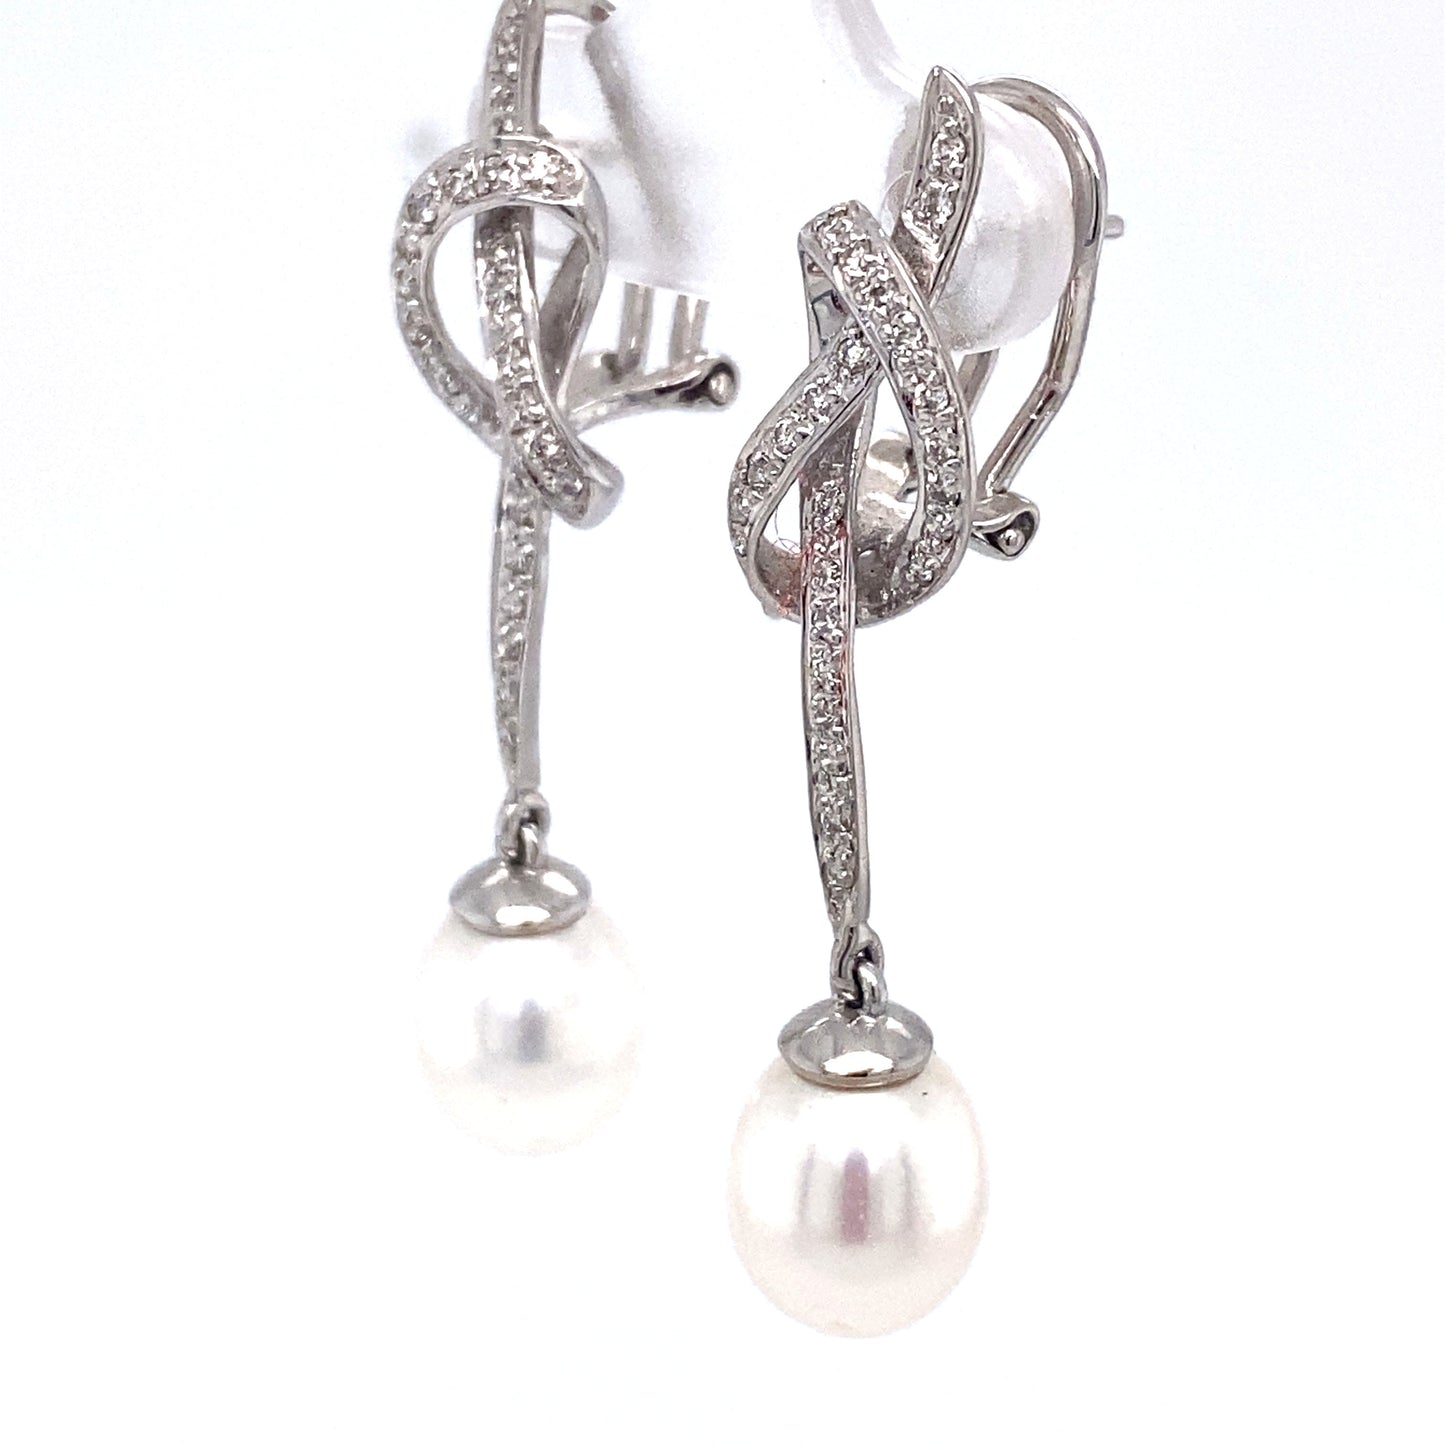 Circa 1980s 0.75 Carat Diamond and Pearl Knot Dangle Earrings in 18K White Gold